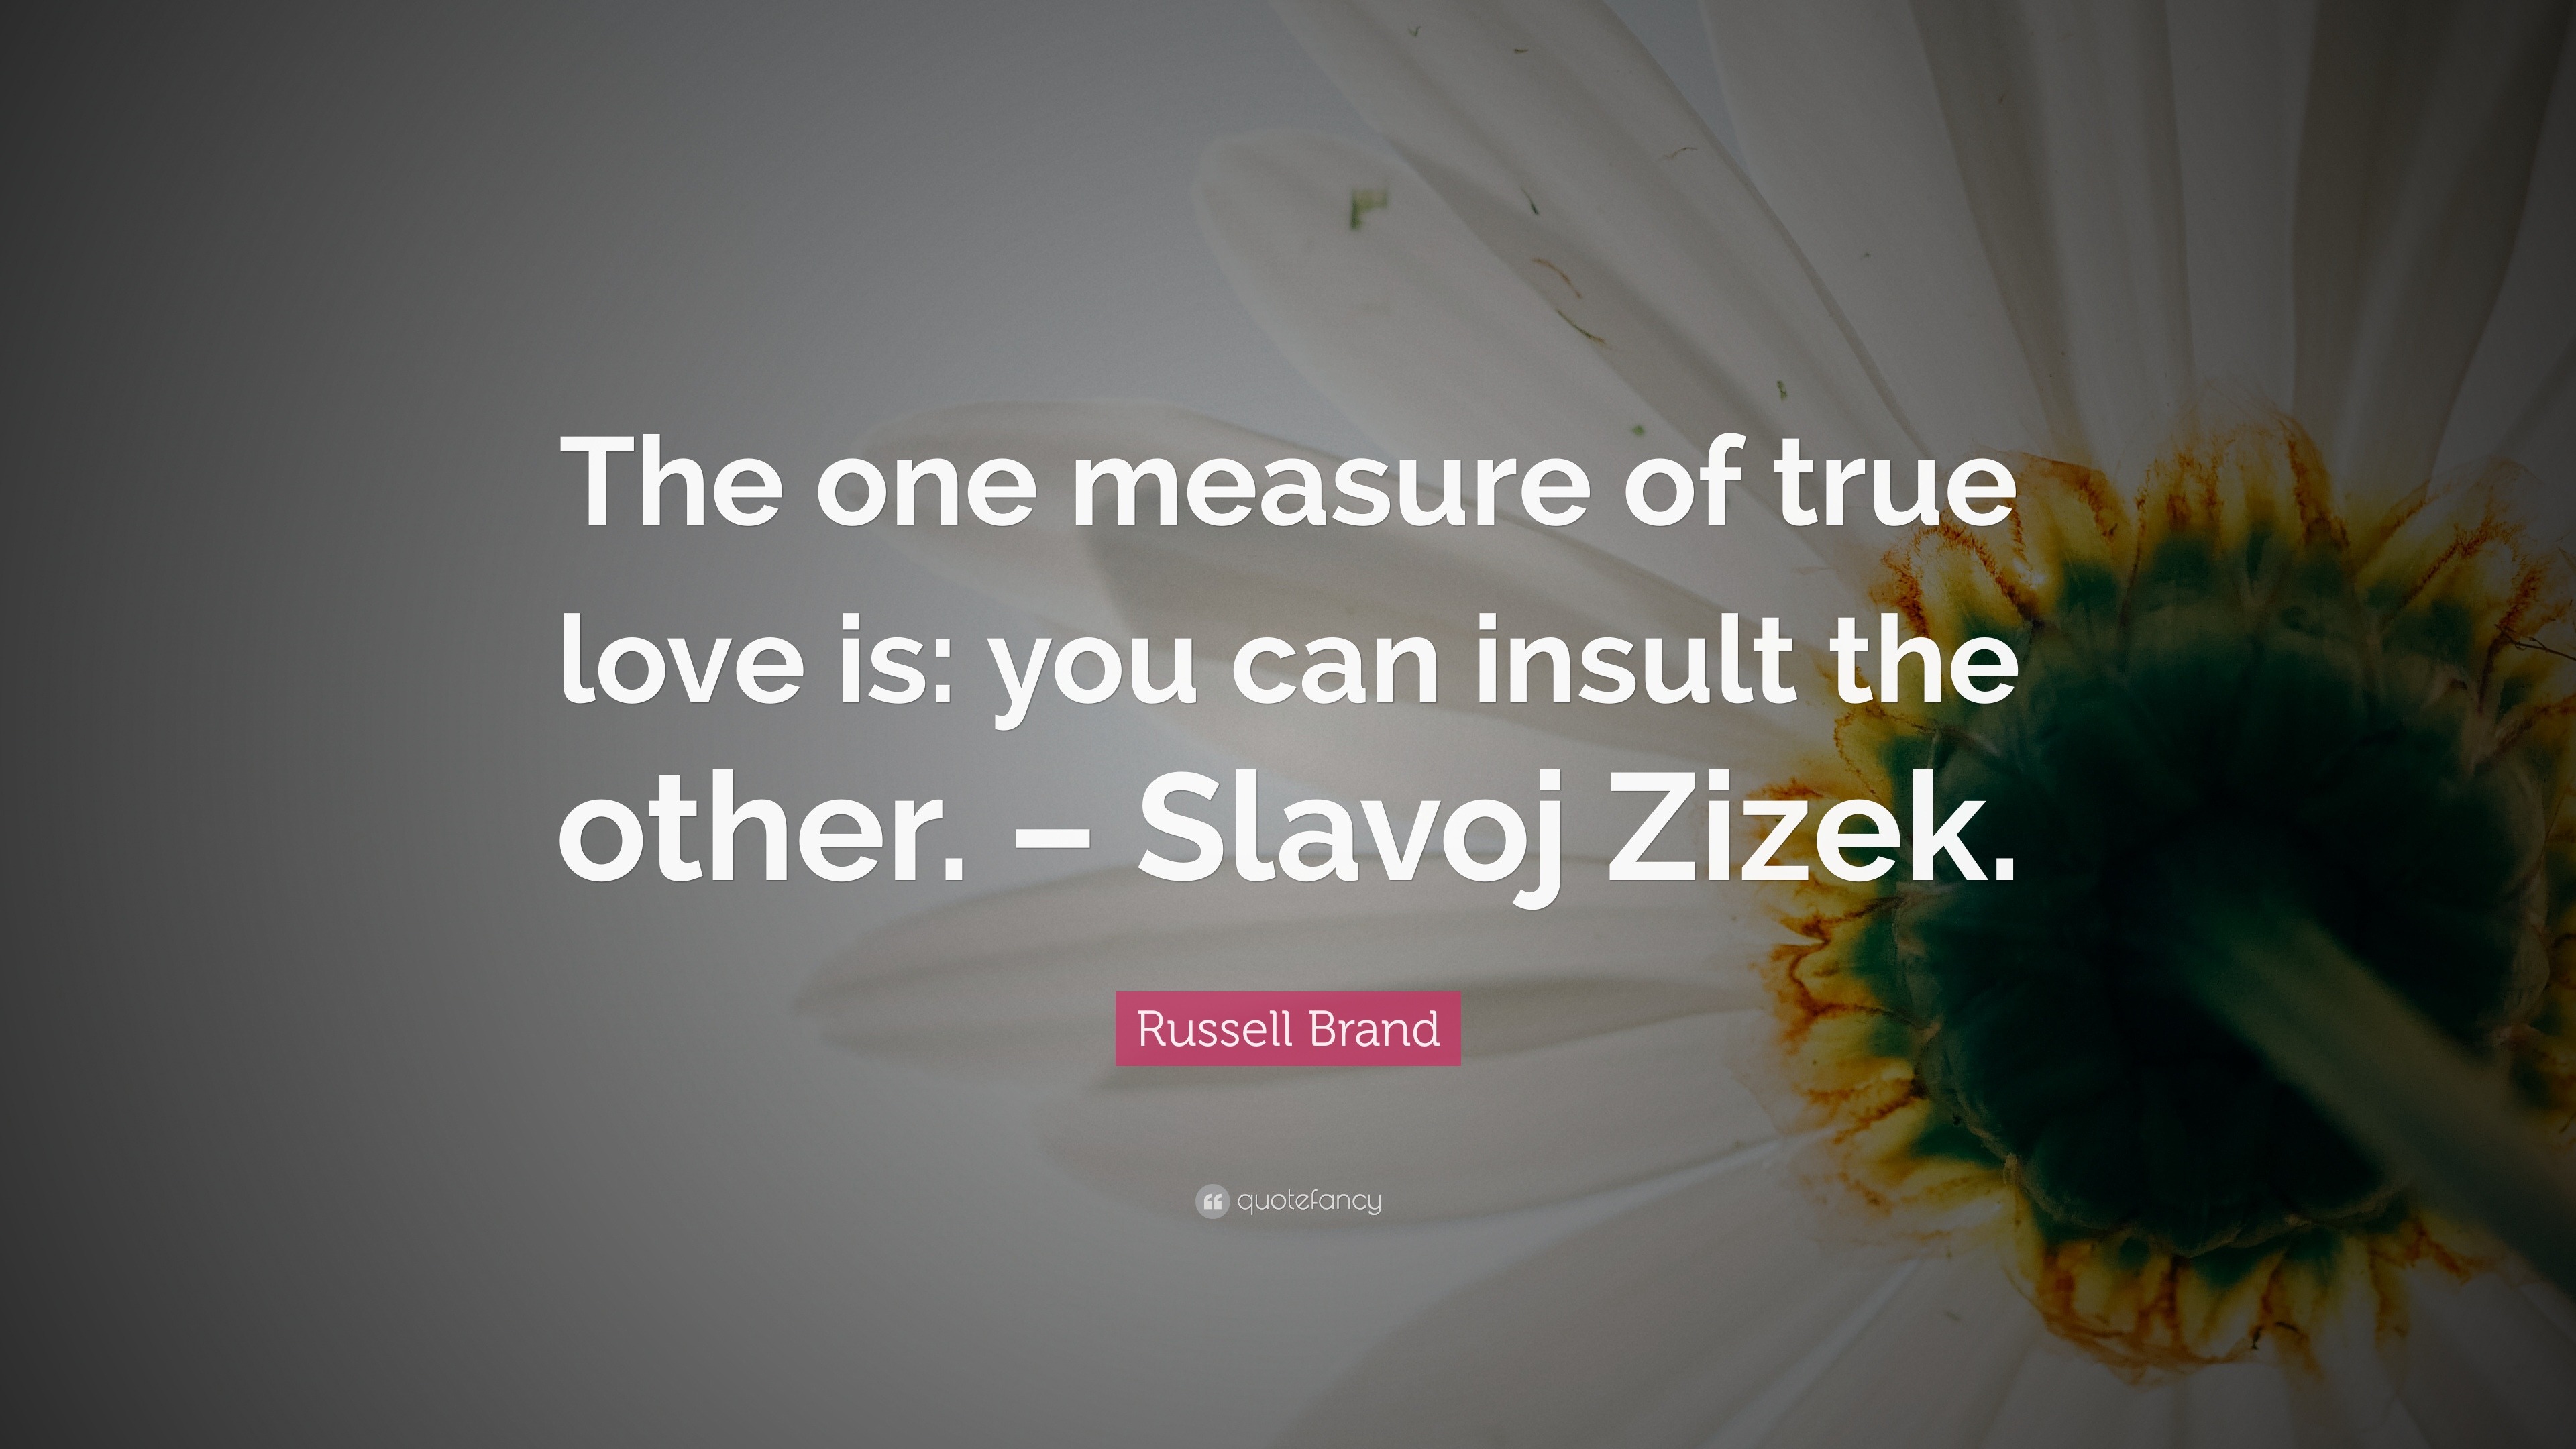 Russell Brand Quote: “The One Measure Of True Love Is: You Can Insult The Other. – Slavoj